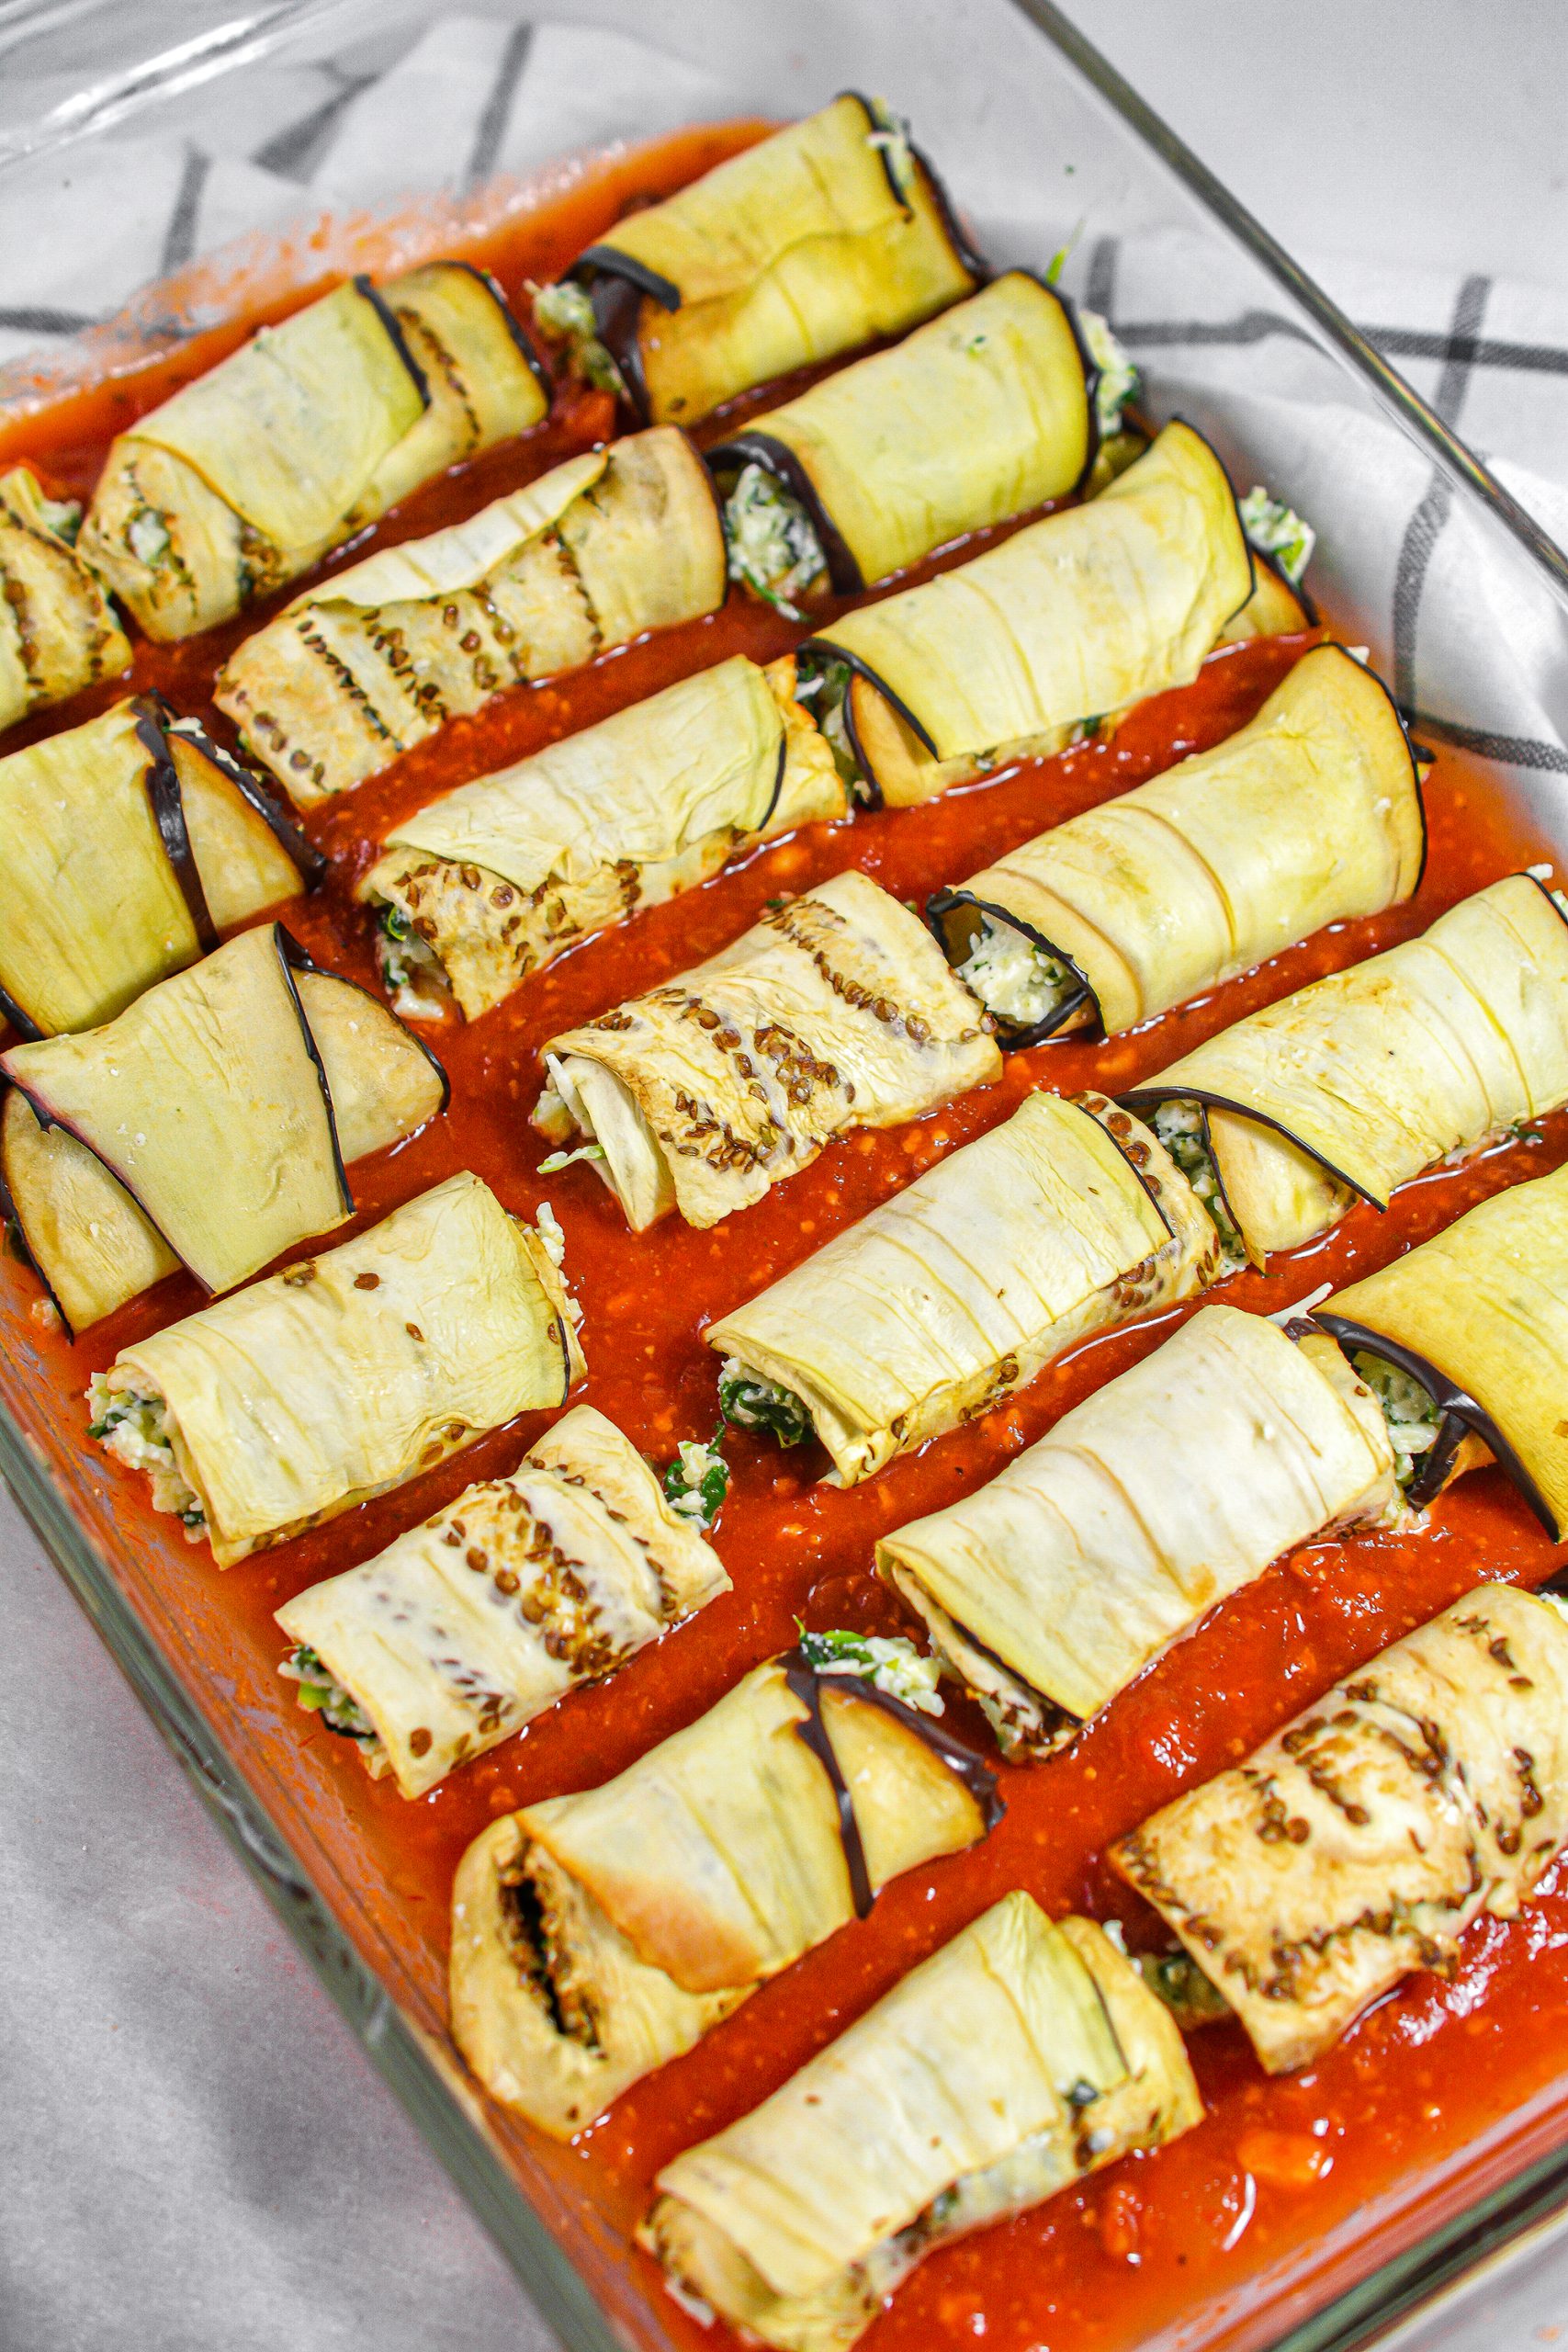 Place the filled eggplant rolls into the baking sheet on top of the sauce.